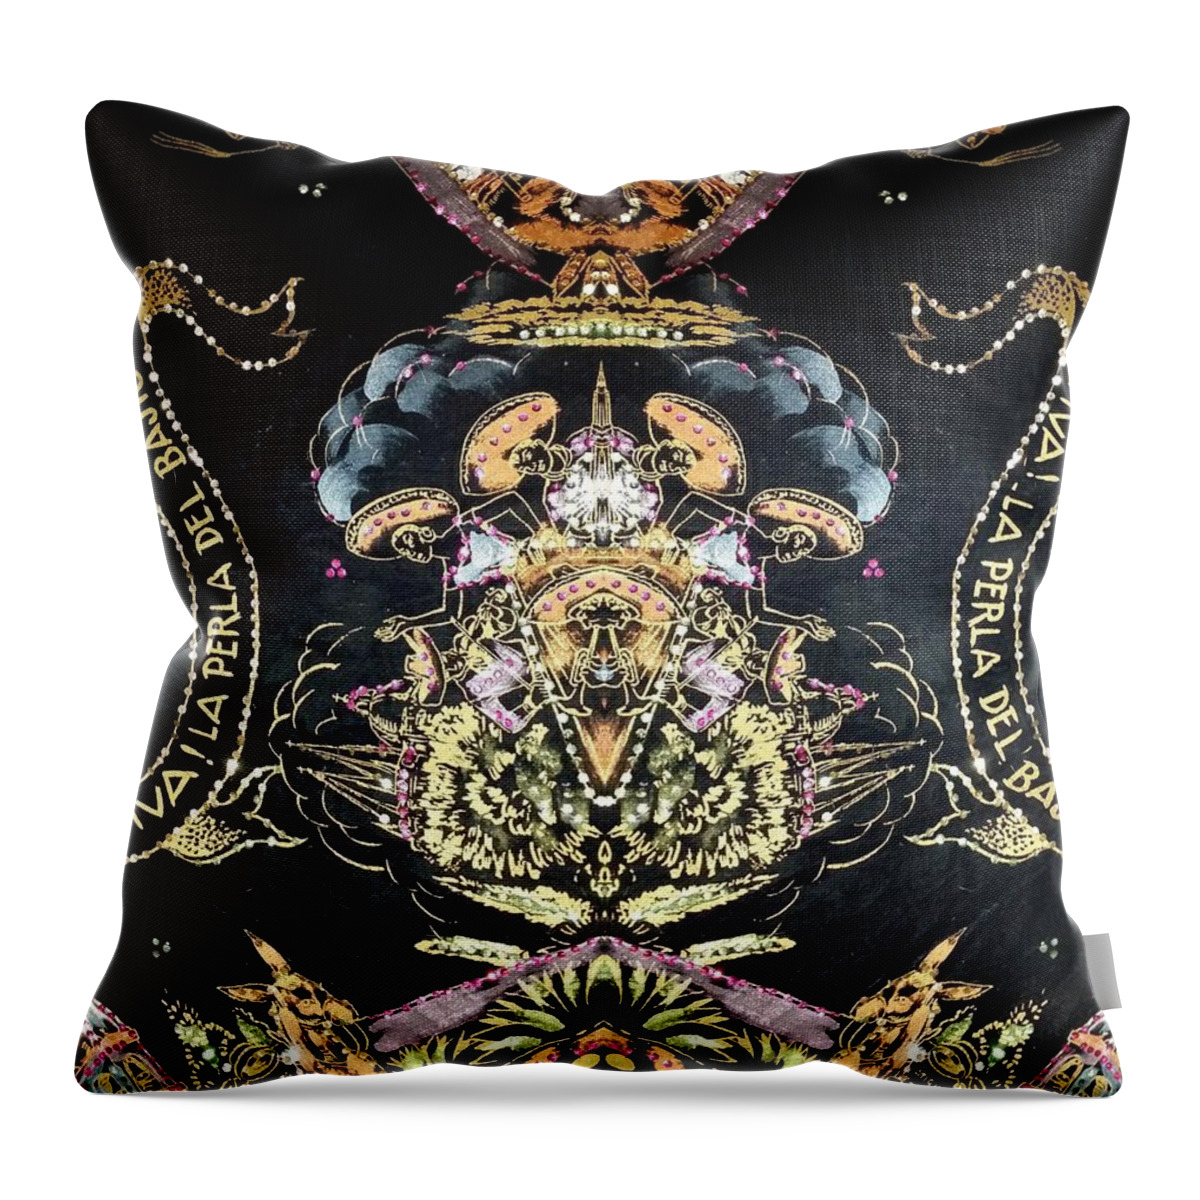 Texture Throw Pillow featuring the digital art Patch Graphic series #31 by Scott S Baker